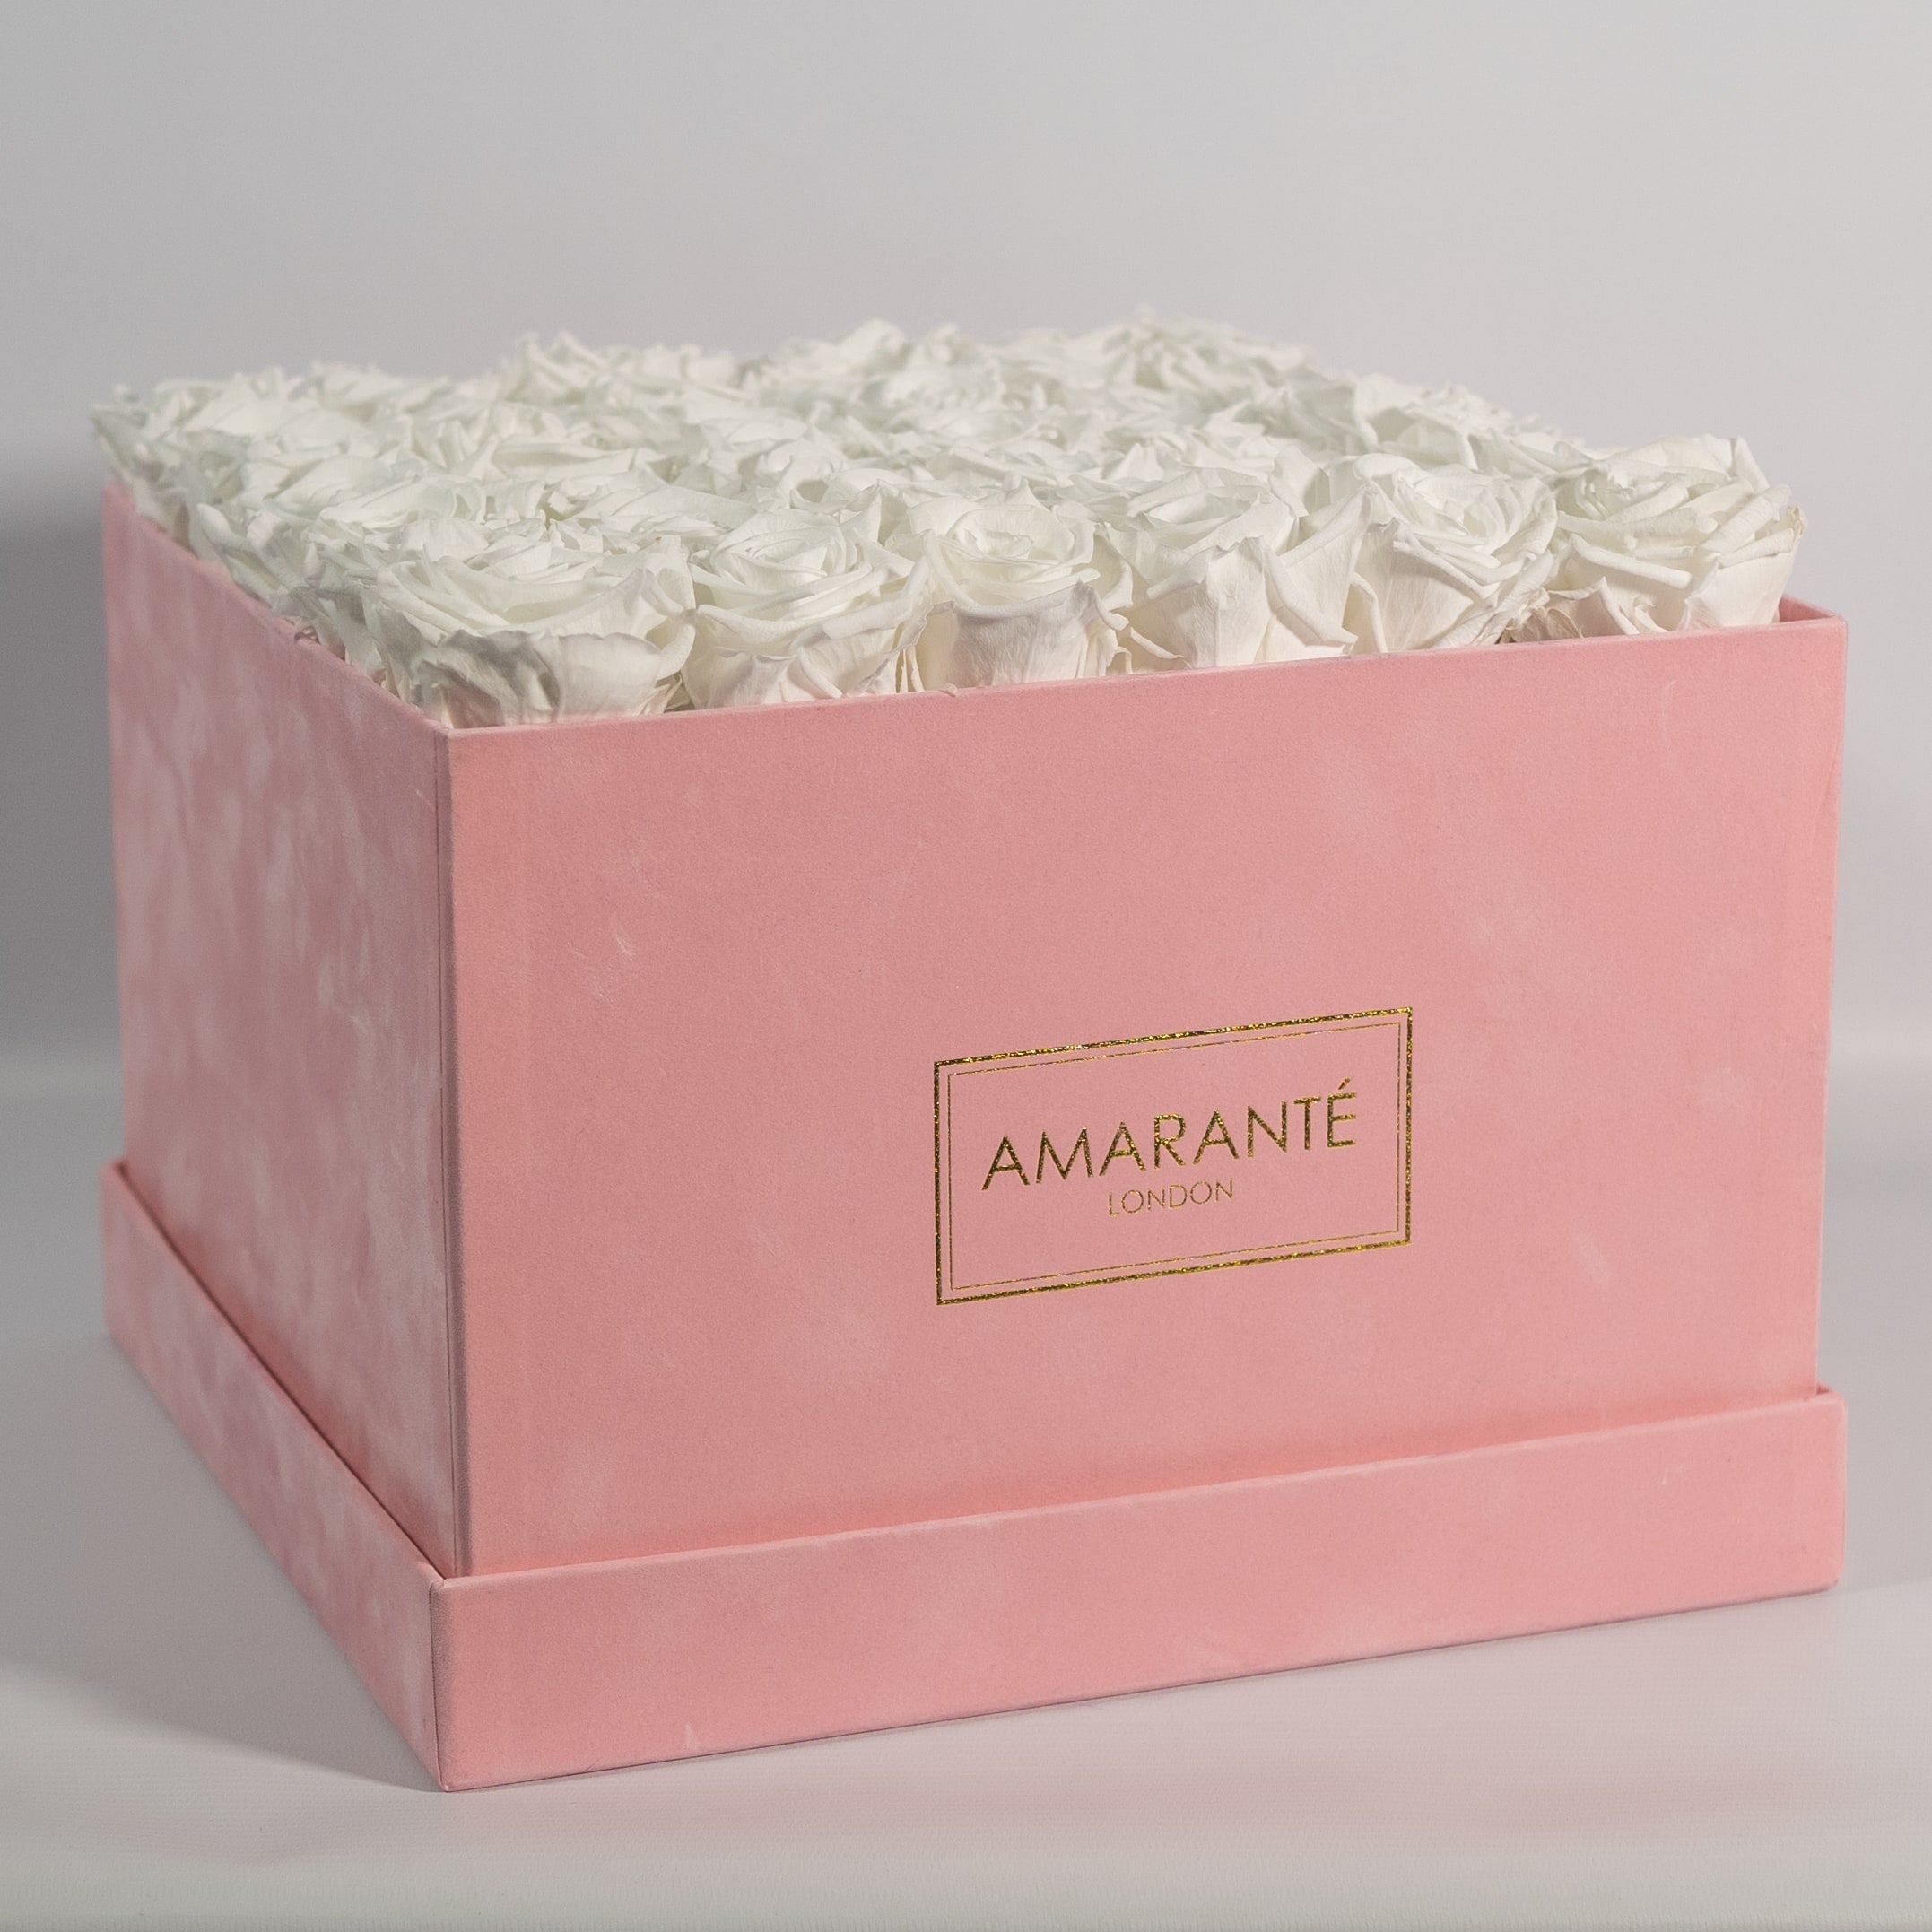 Captivating white roses displayed in a magical pink box 